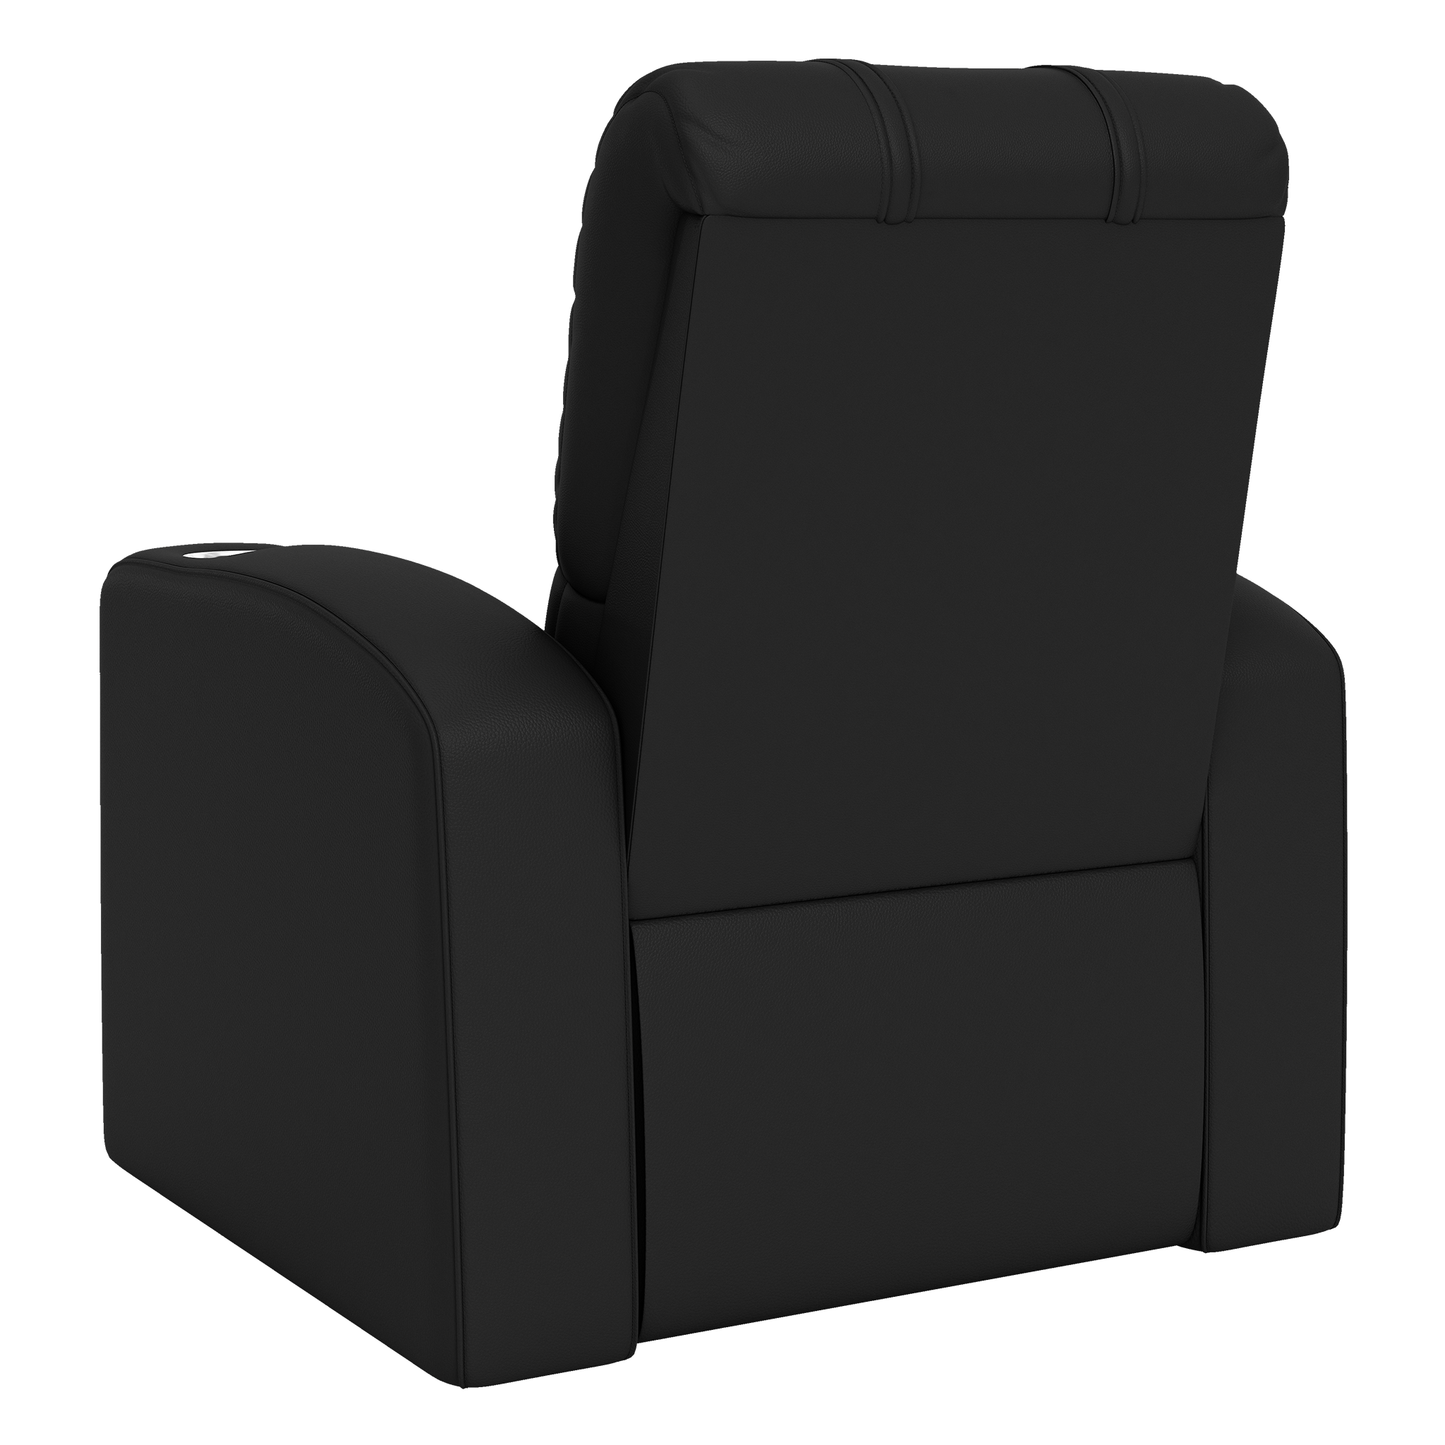 Relax Home Theater Recliner with Missouri Tigers Logo